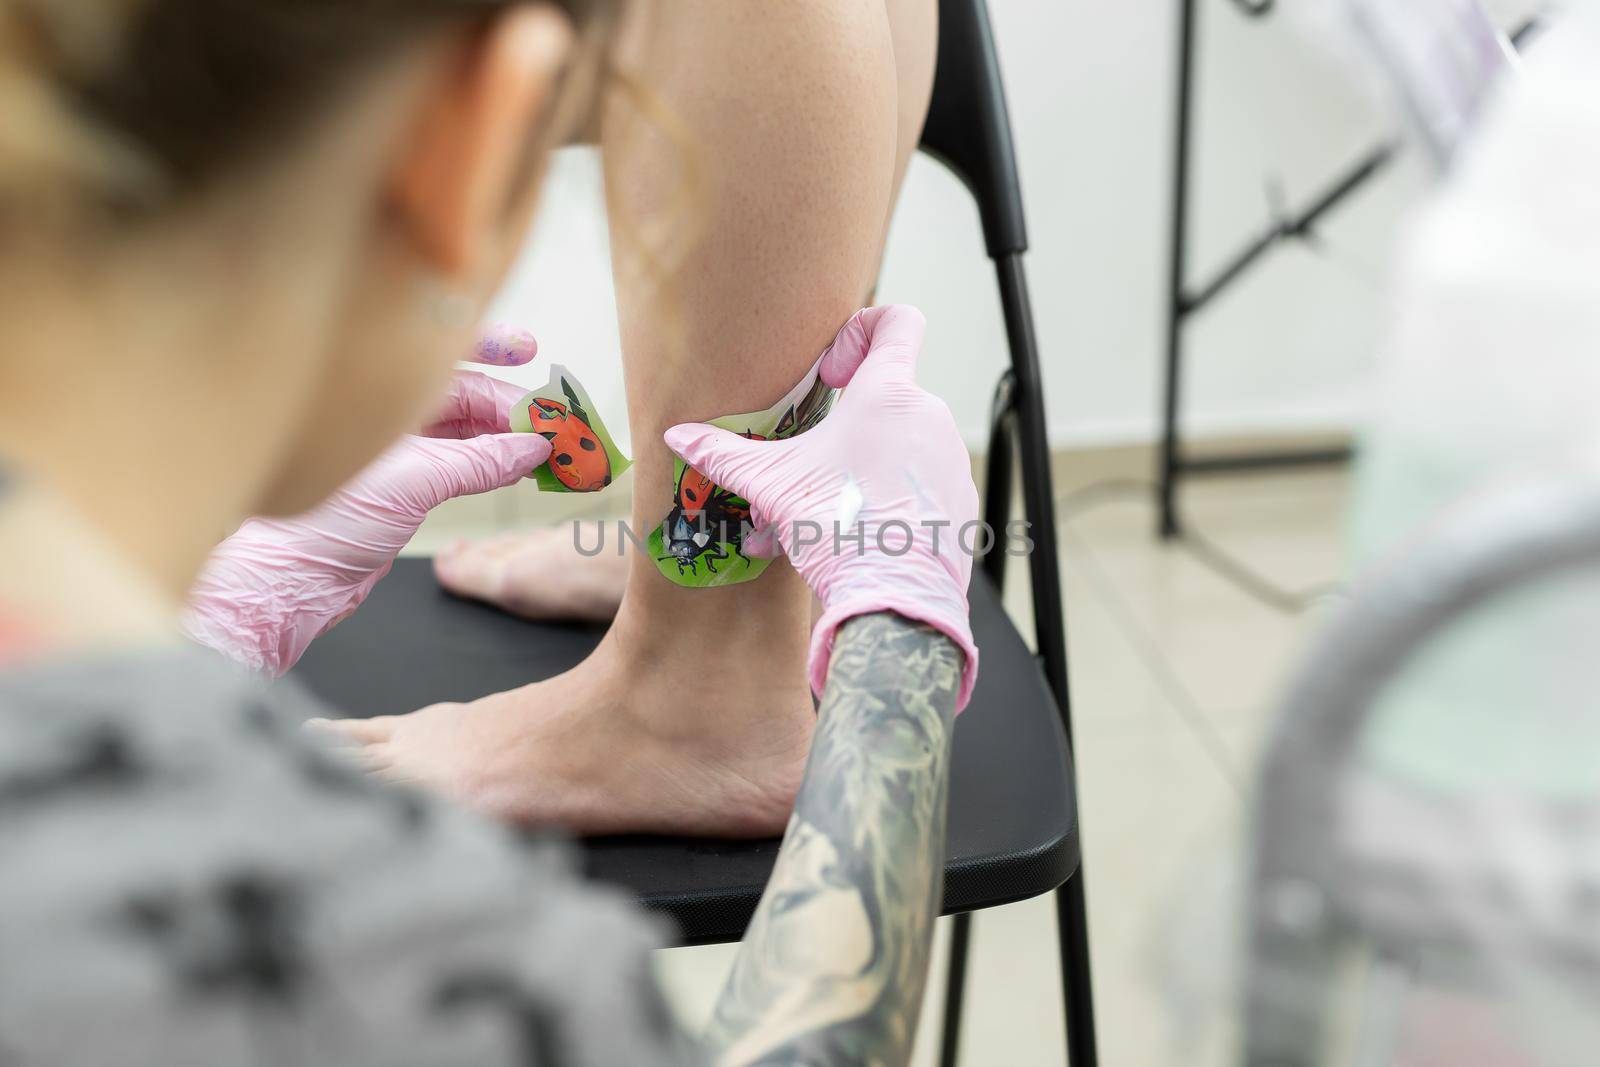 Tattoo artist puts a drawing of a ladybug on the leg of a young woman, the process of creating a tattoo. A girl takes a picture on a woman's leg. A tattoo artist makes a tattoo. Close-up.